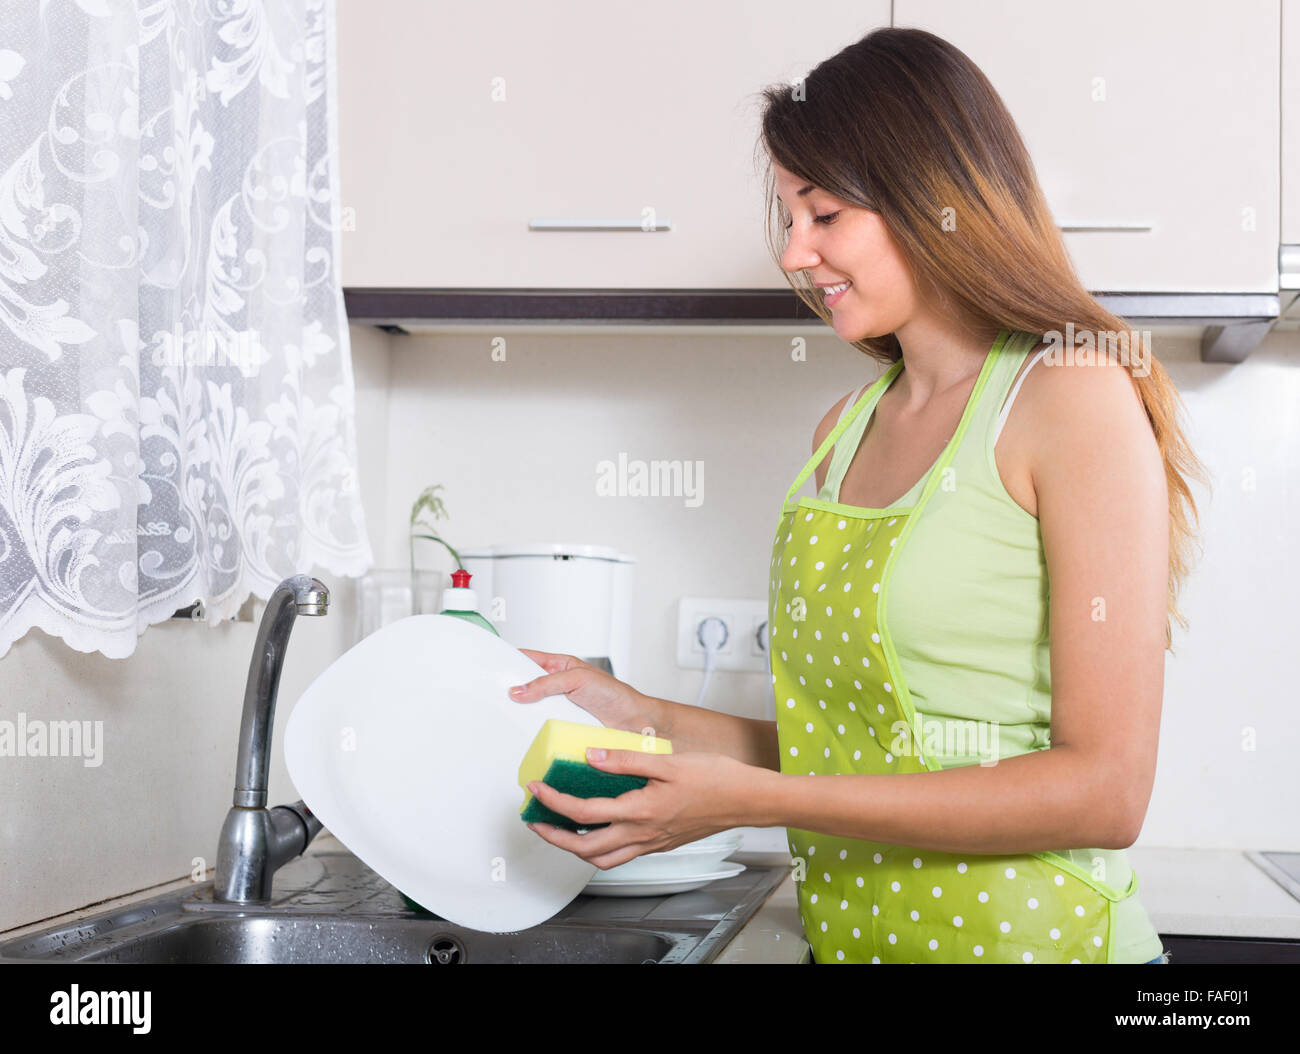 https://c8.alamy.com/comp/FAF0J1/young-smiling-woman-in-apron-washing-kitchenware-in-the-kitchen-FAF0J1.jpg